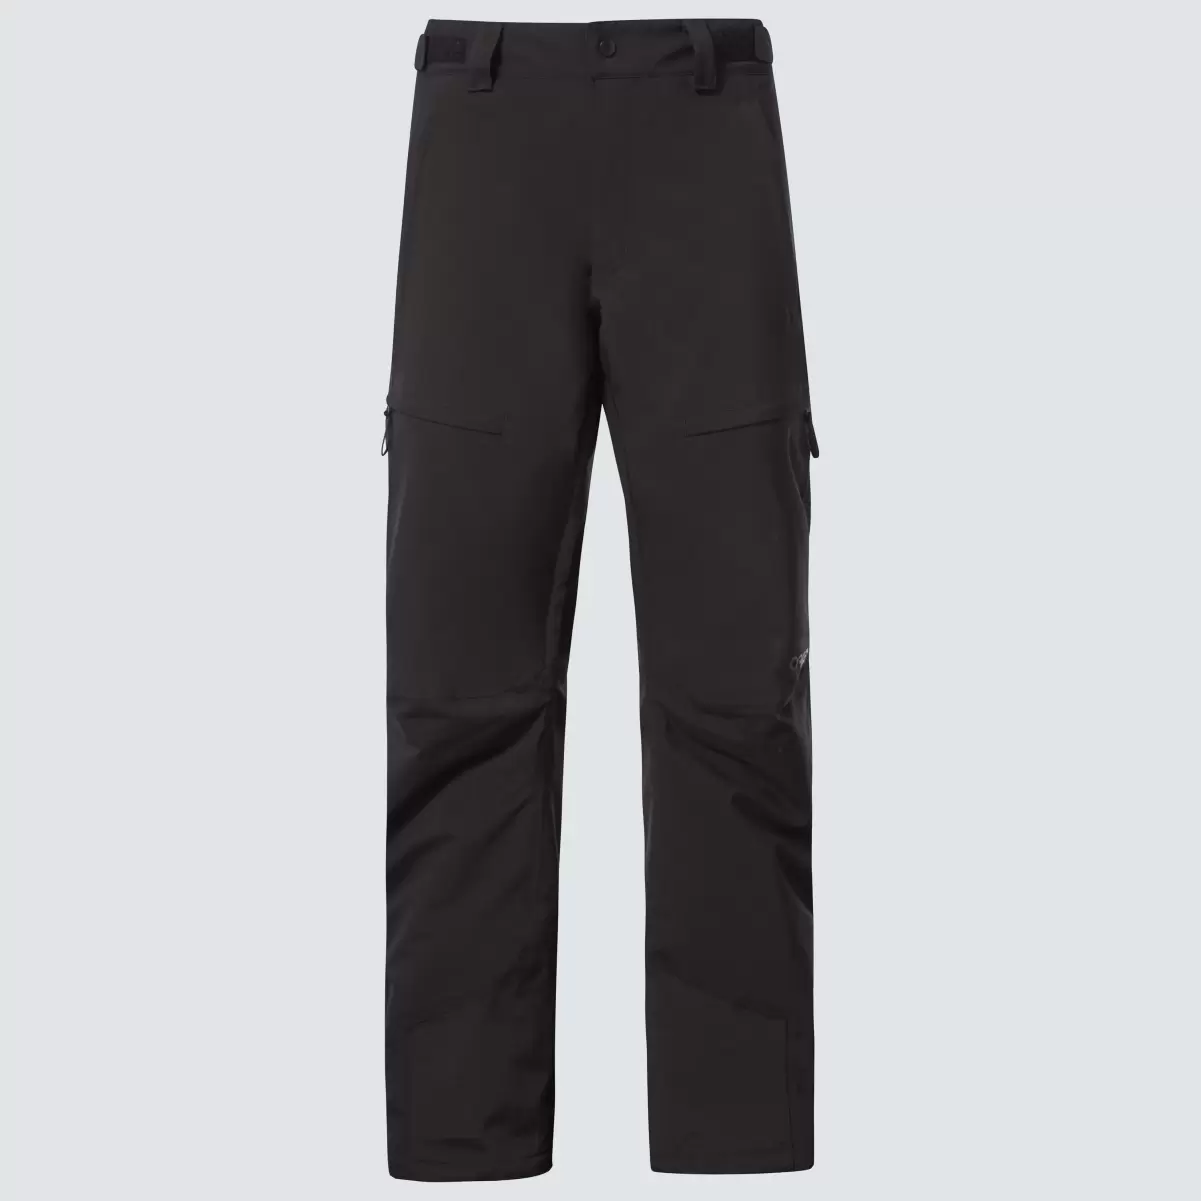 Men Oakley Axis Insulated Pant Pants Blackout - 2